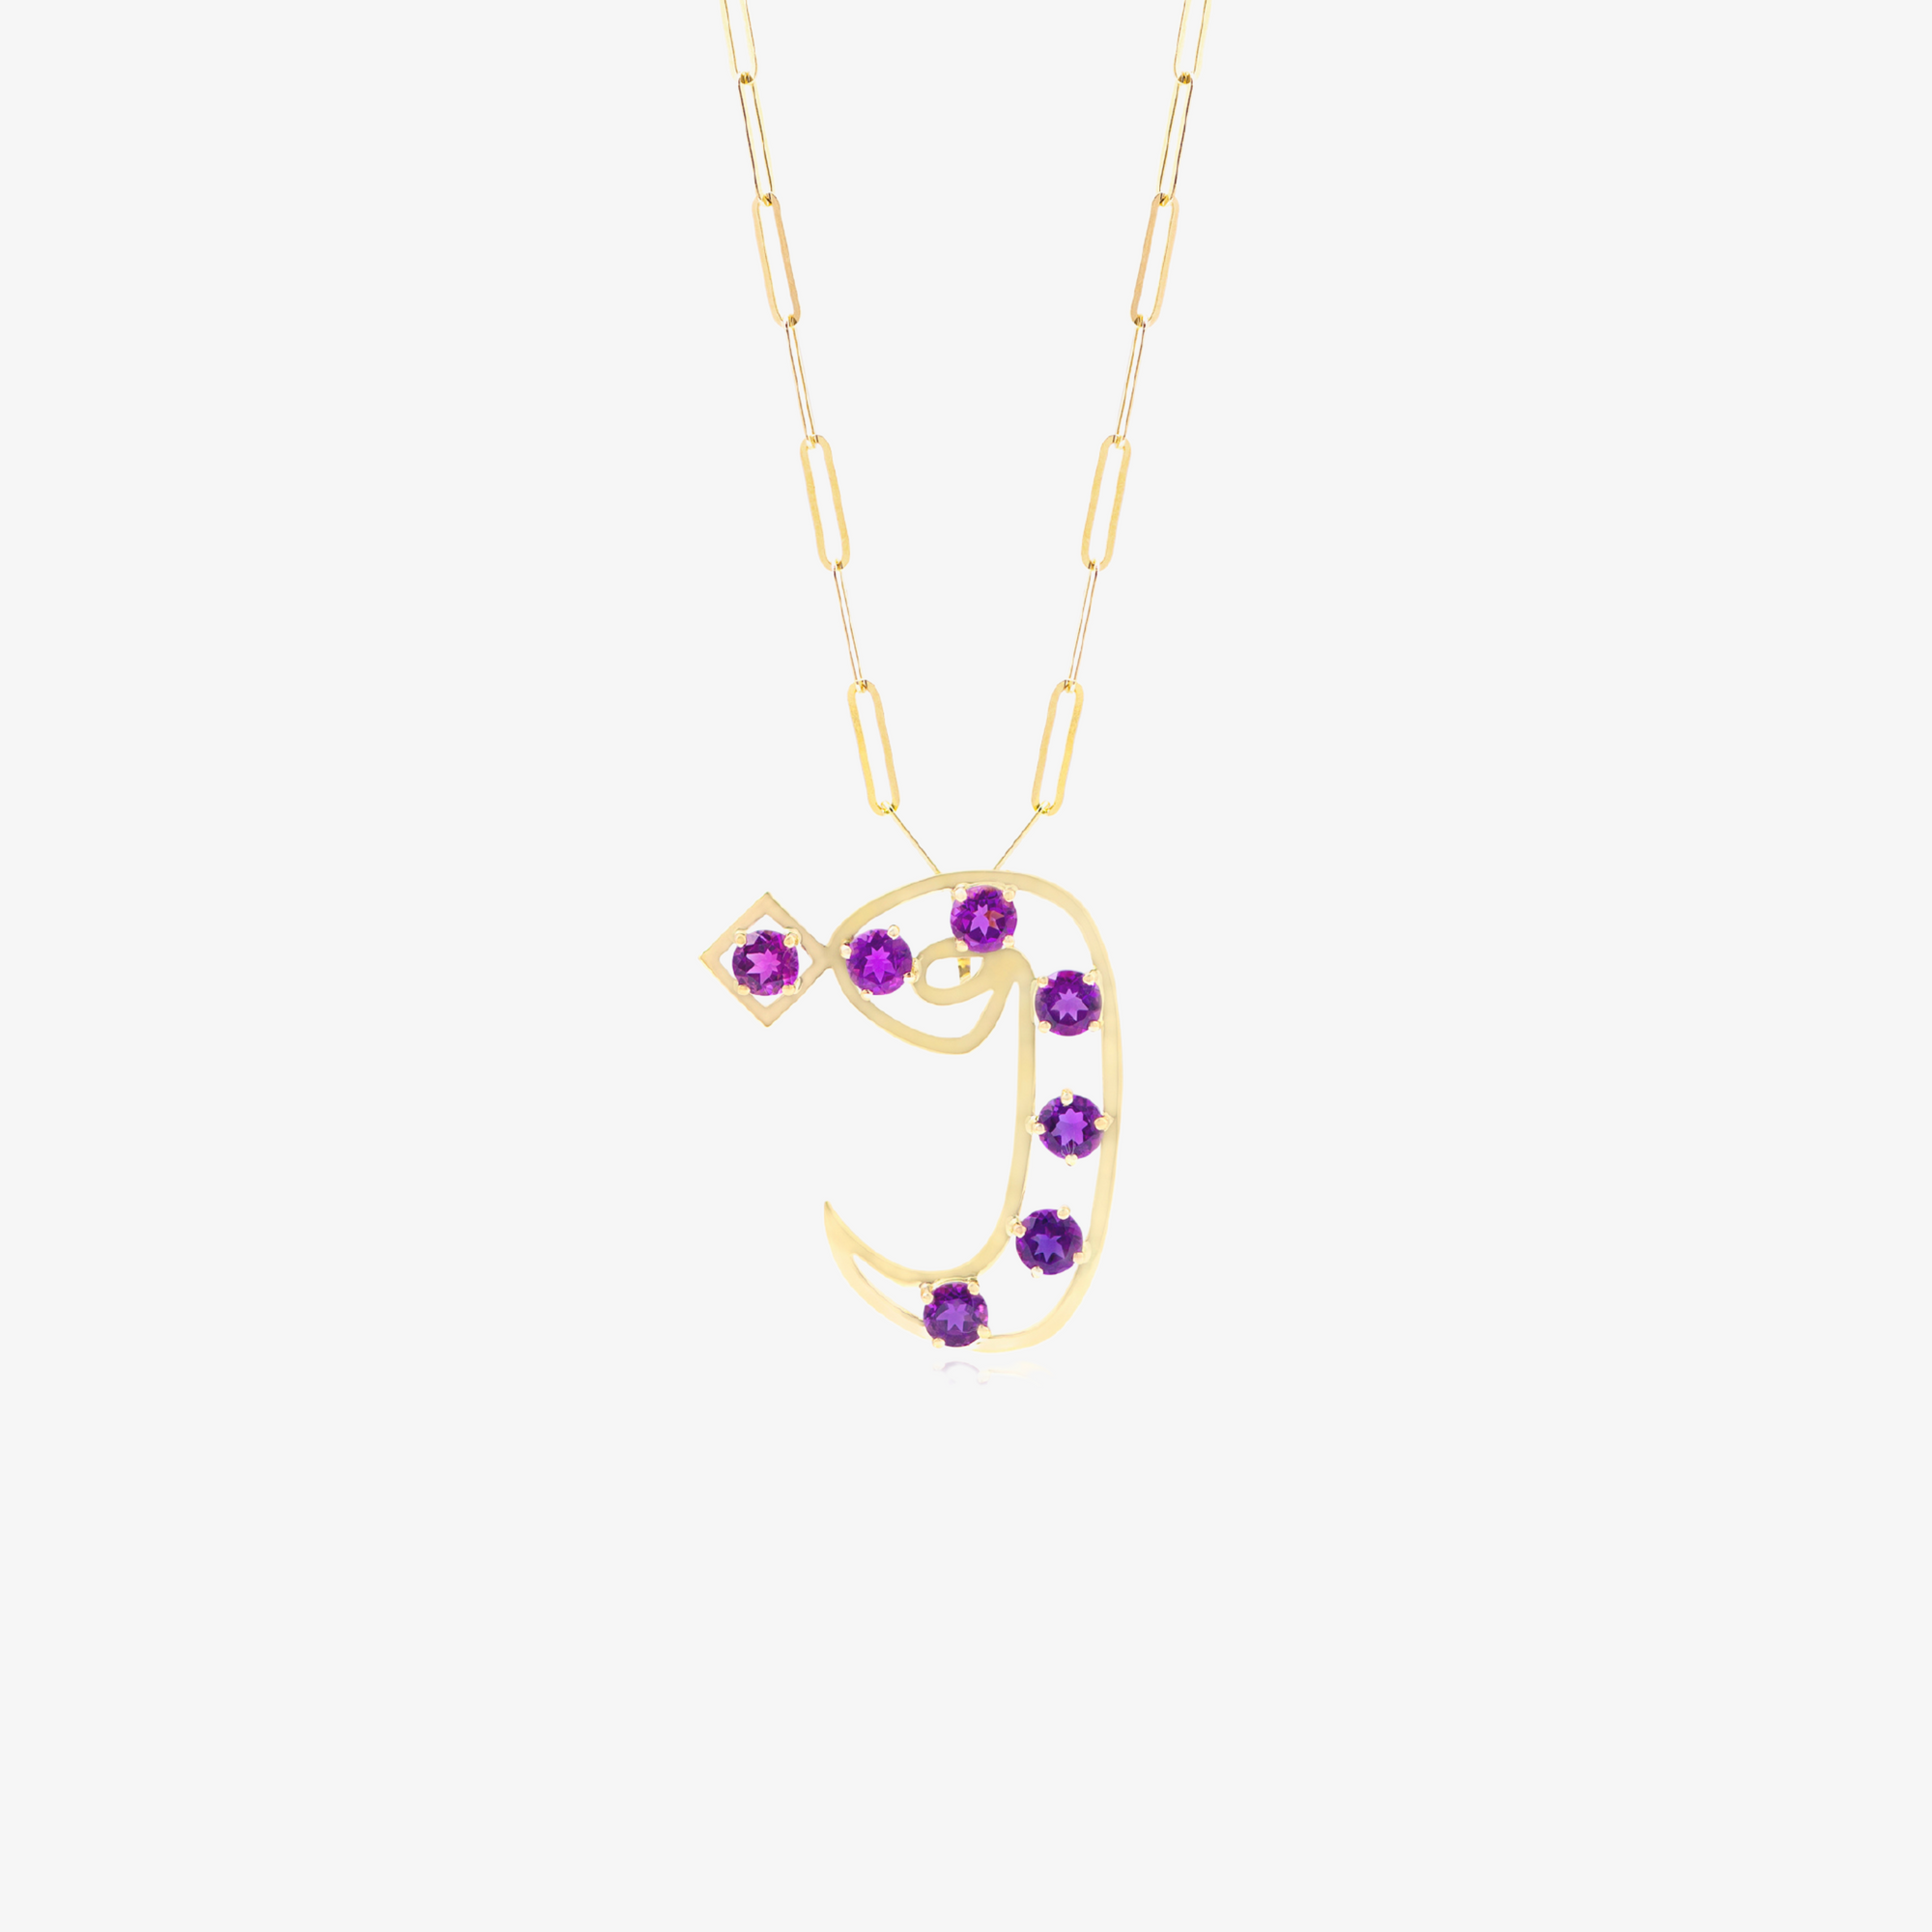 OULA - Gold Frame Necklace with Amethyst Stones